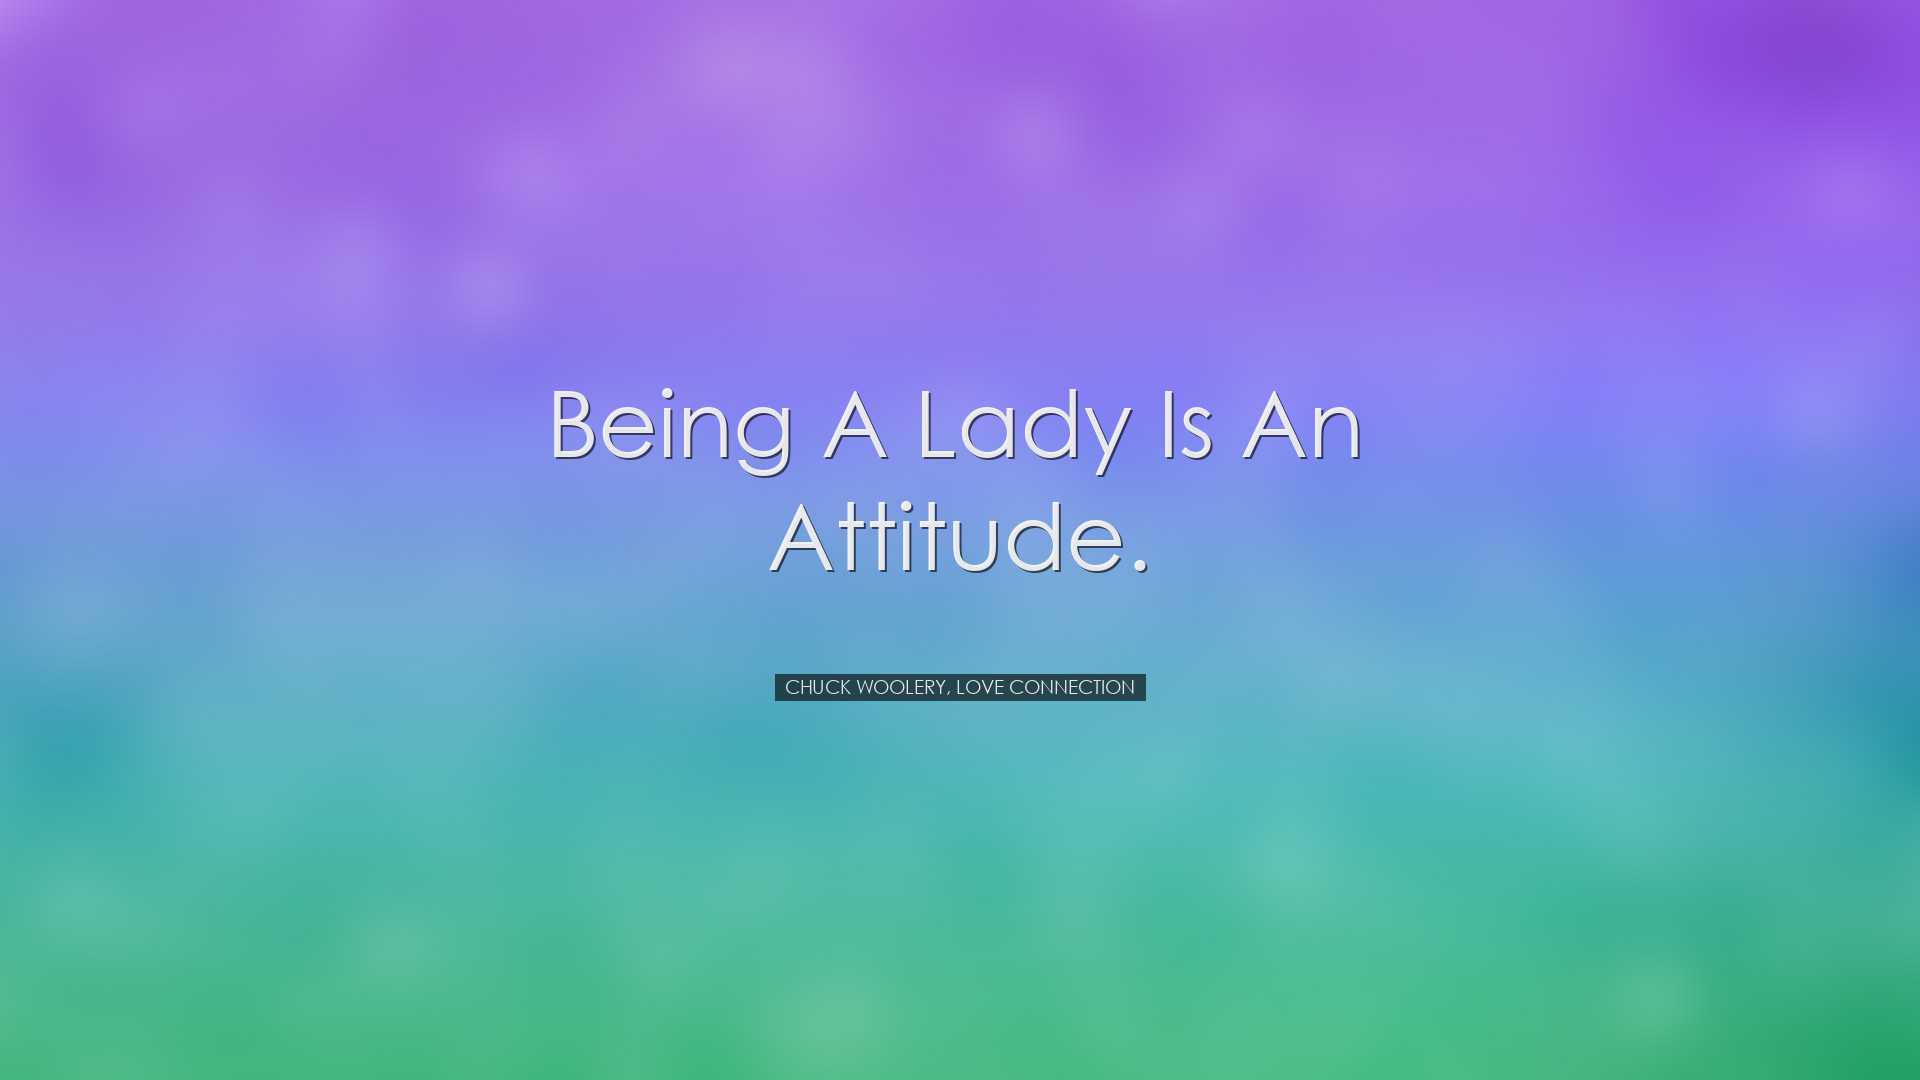 Being a lady is an attitude. - Chuck Woolery, Love Connection